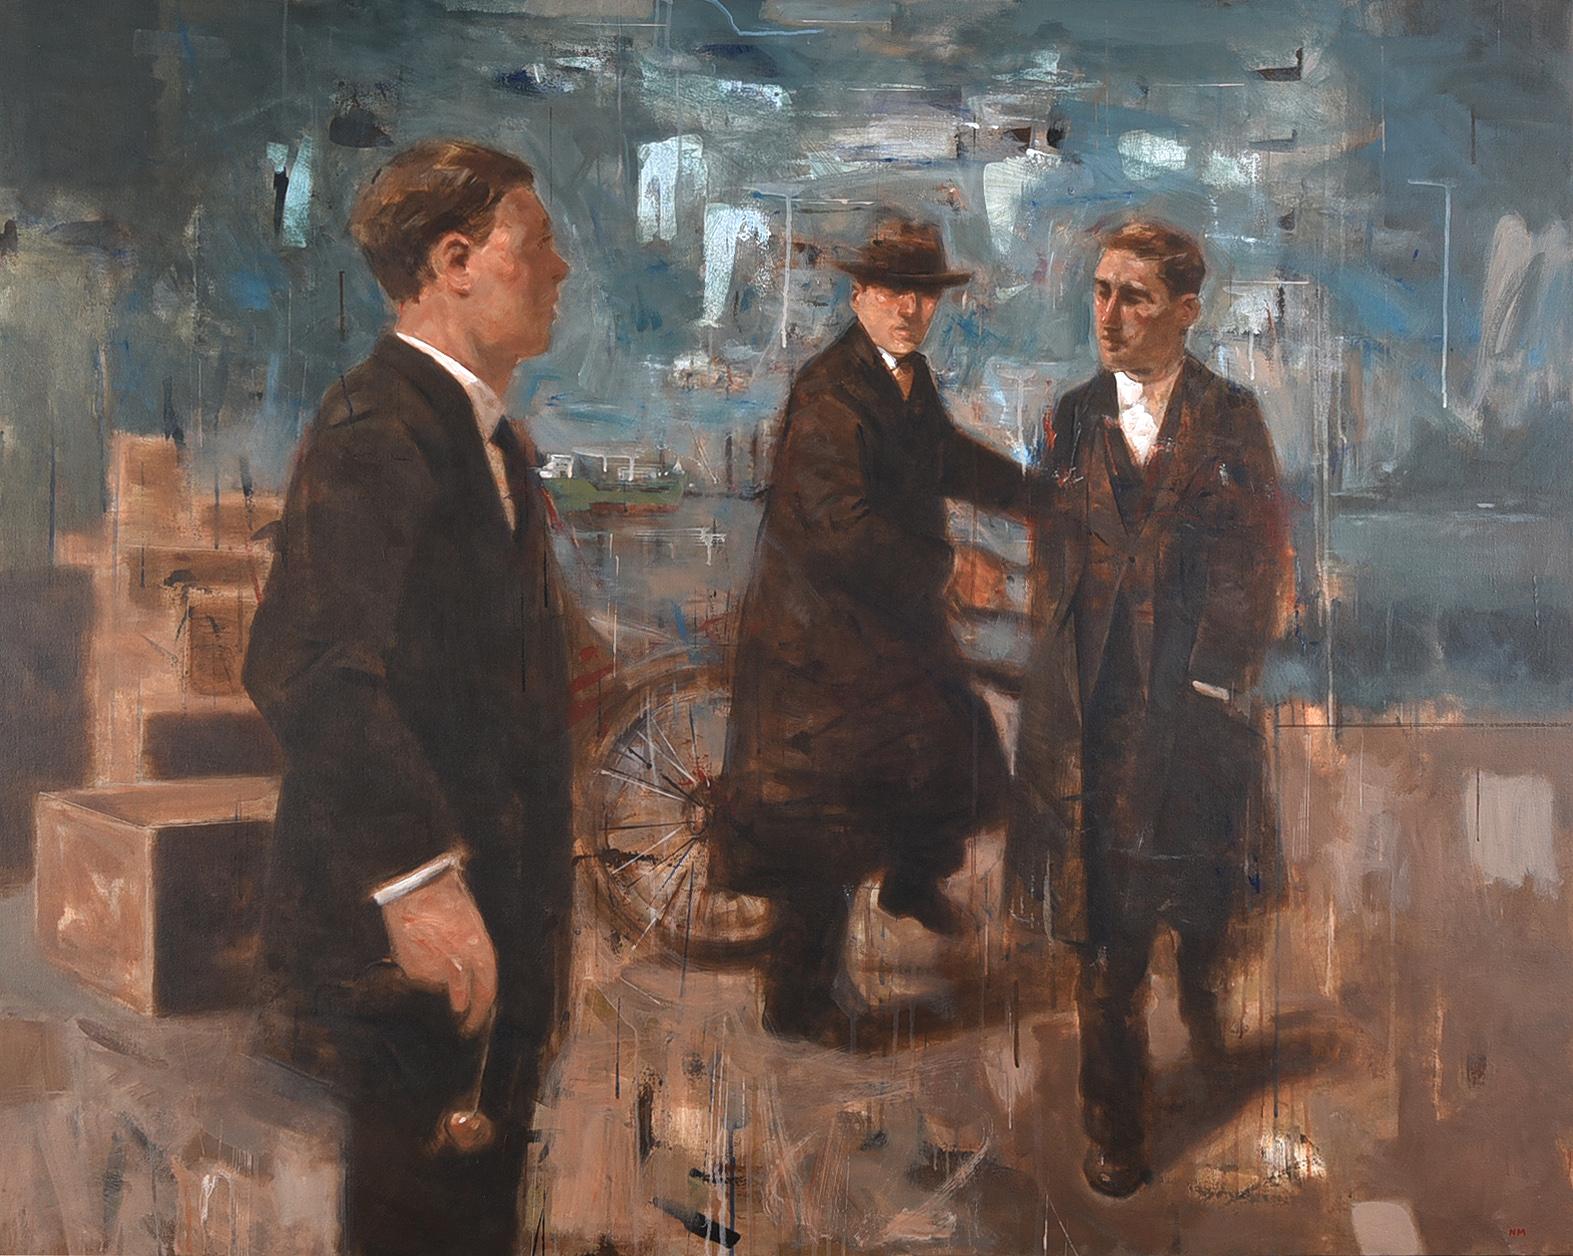 Oil on canvas
Signed in Mono
Framed
Measure: 48 x 60 inches (51 x 63 inches framed)

Noel Murphy was born in London in 1970, studying first at NCAD (National College of Art and Design) in Dublin and then at the University of Ulster in Belfast where